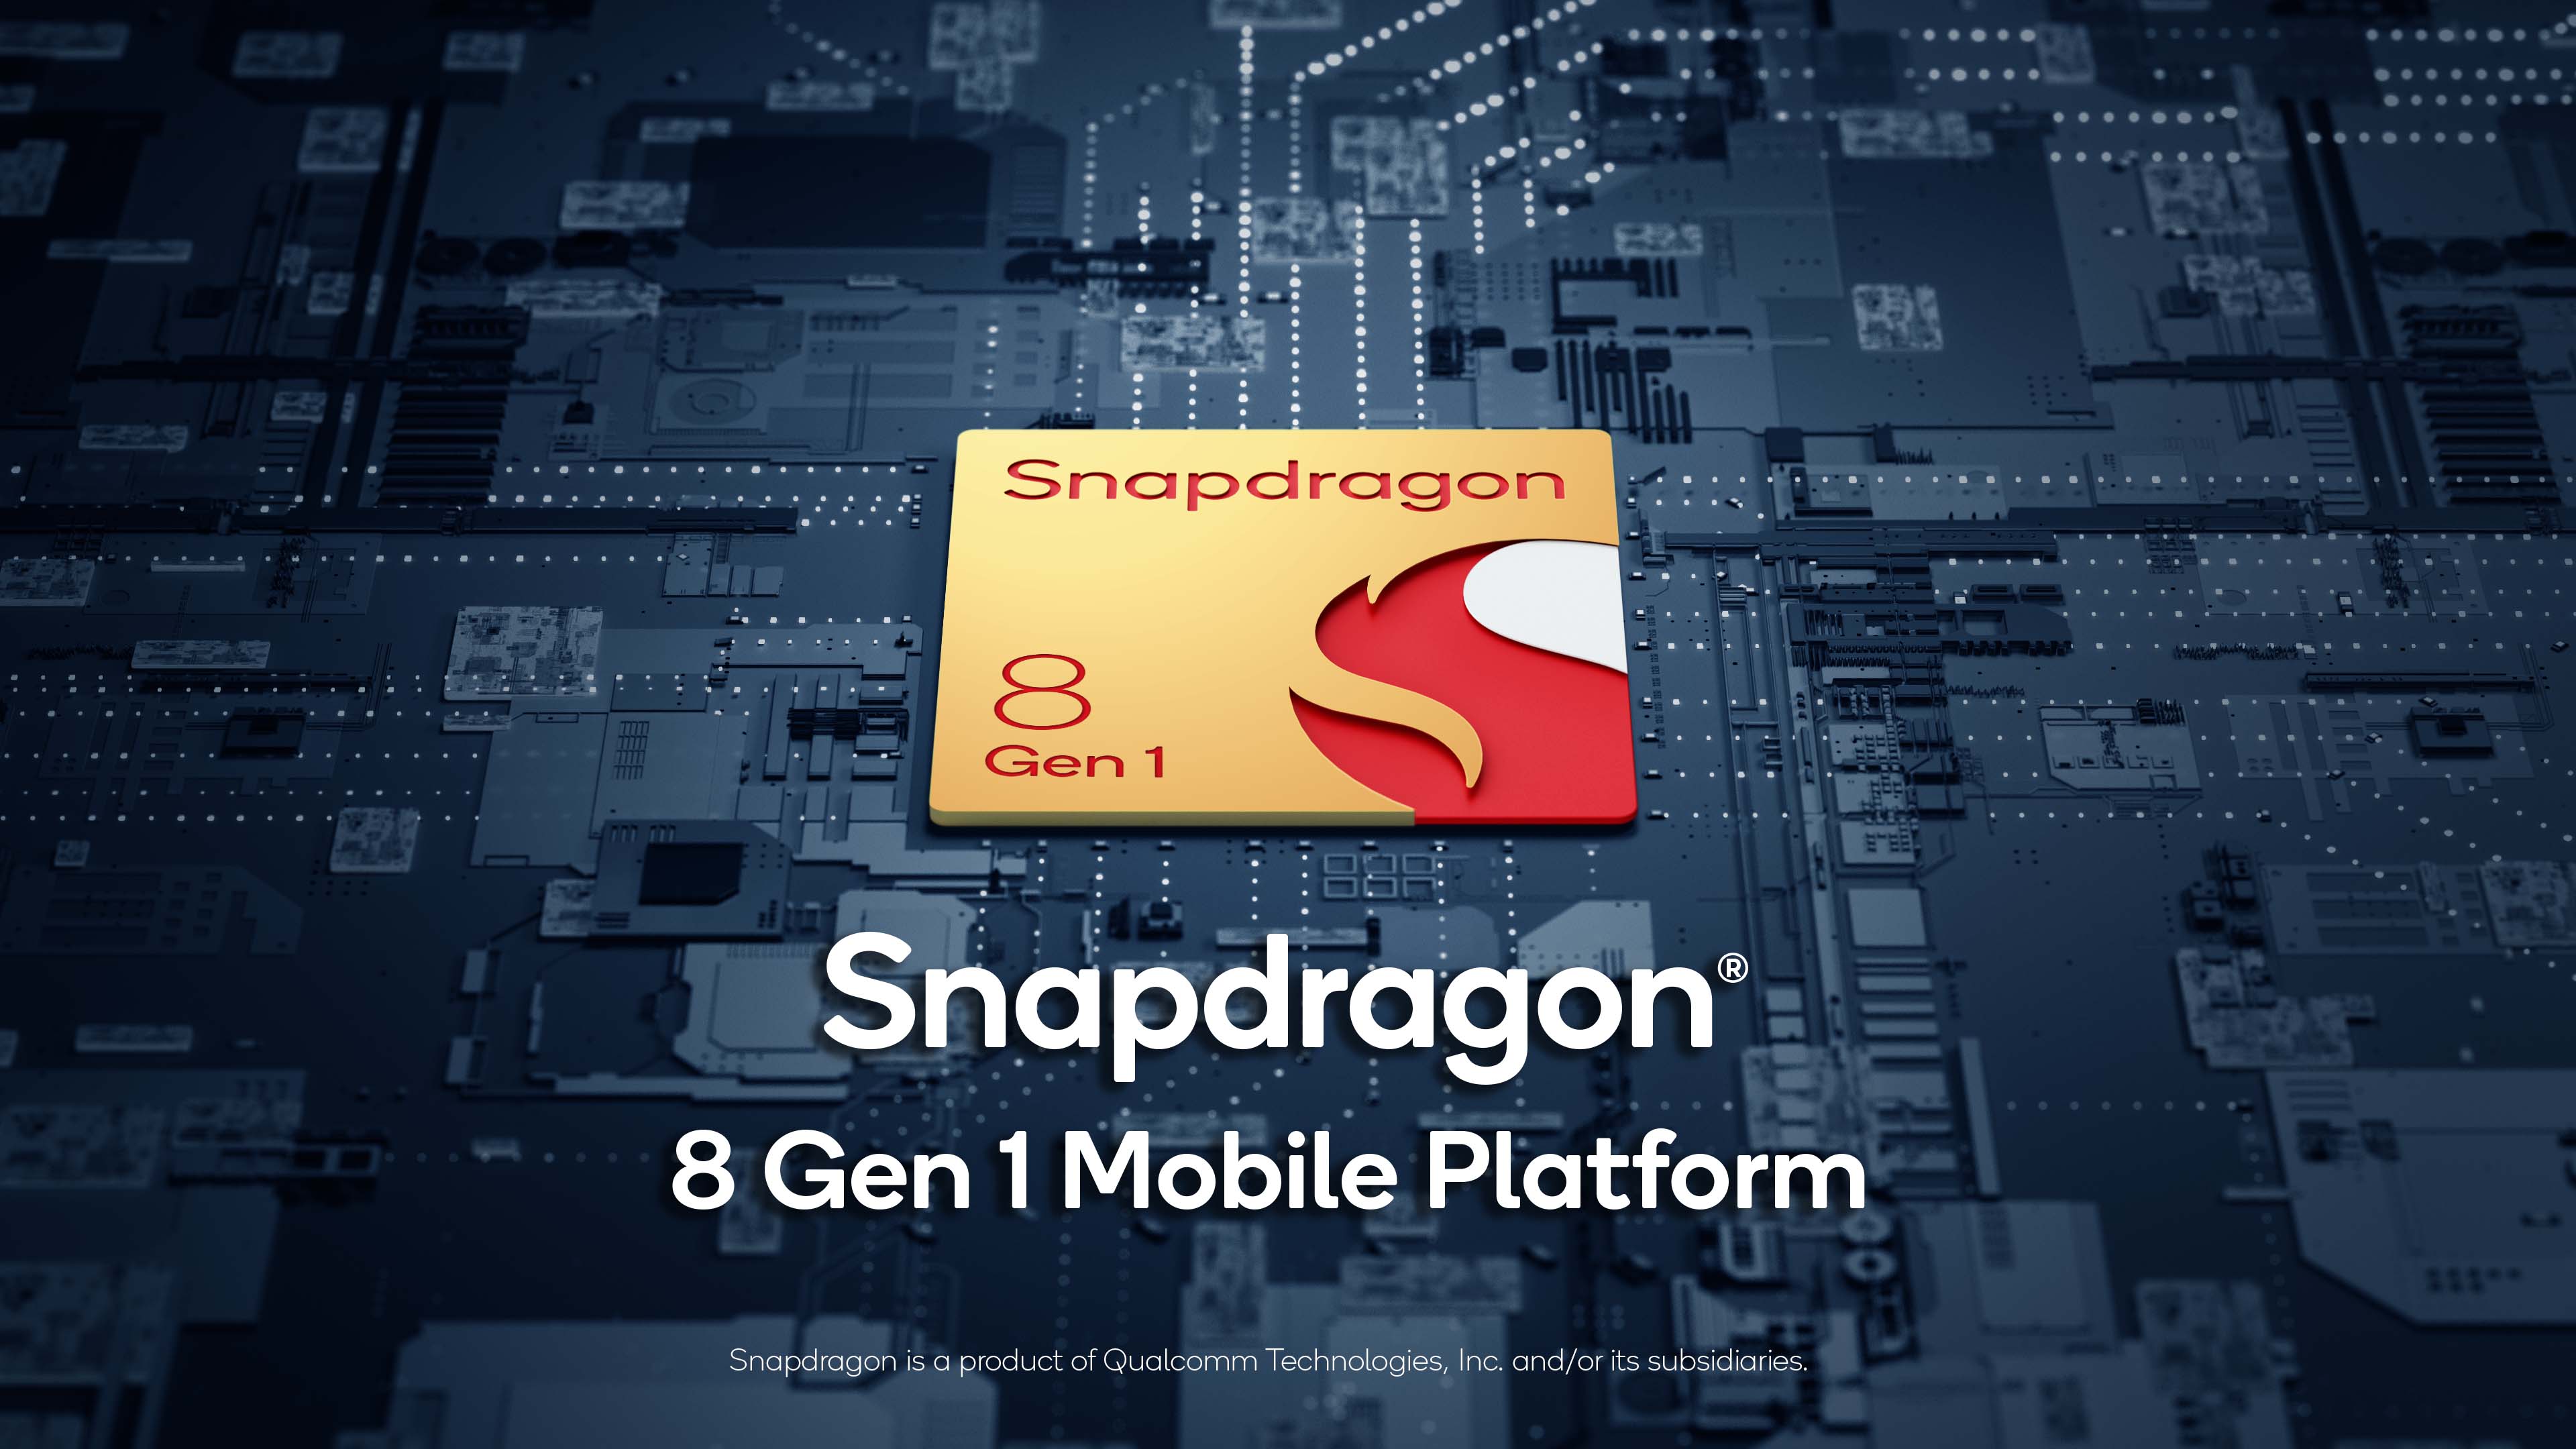 Qualcomm&amp;#39;s new mobile flagship, Snapdragon 8 Gen 1, arrives on devices this year | TechCrunch